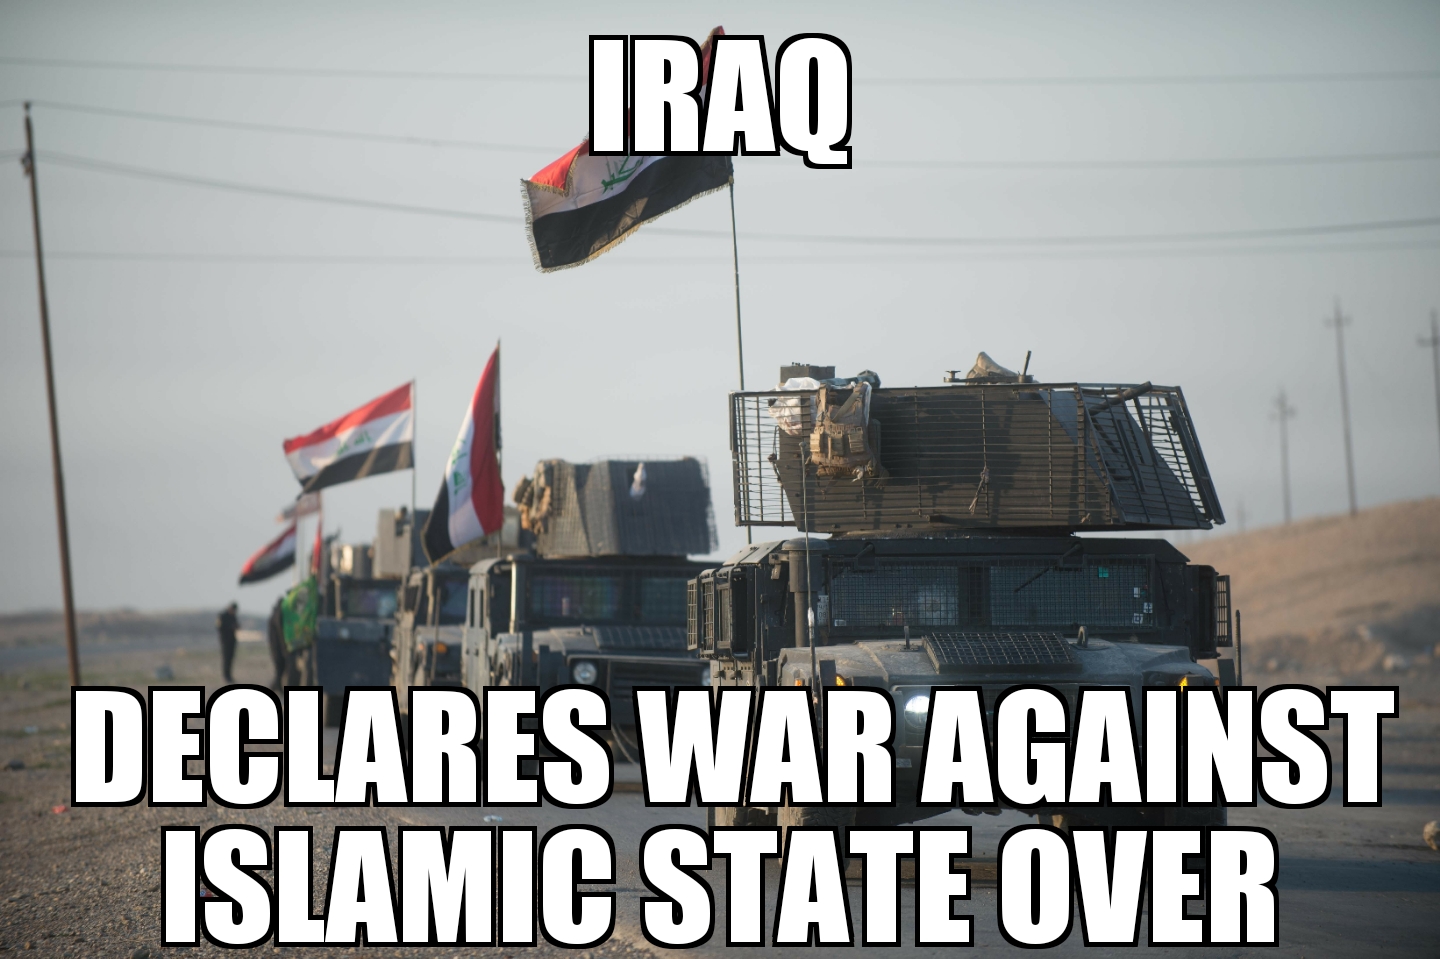 Iraq says war against Islamic State over